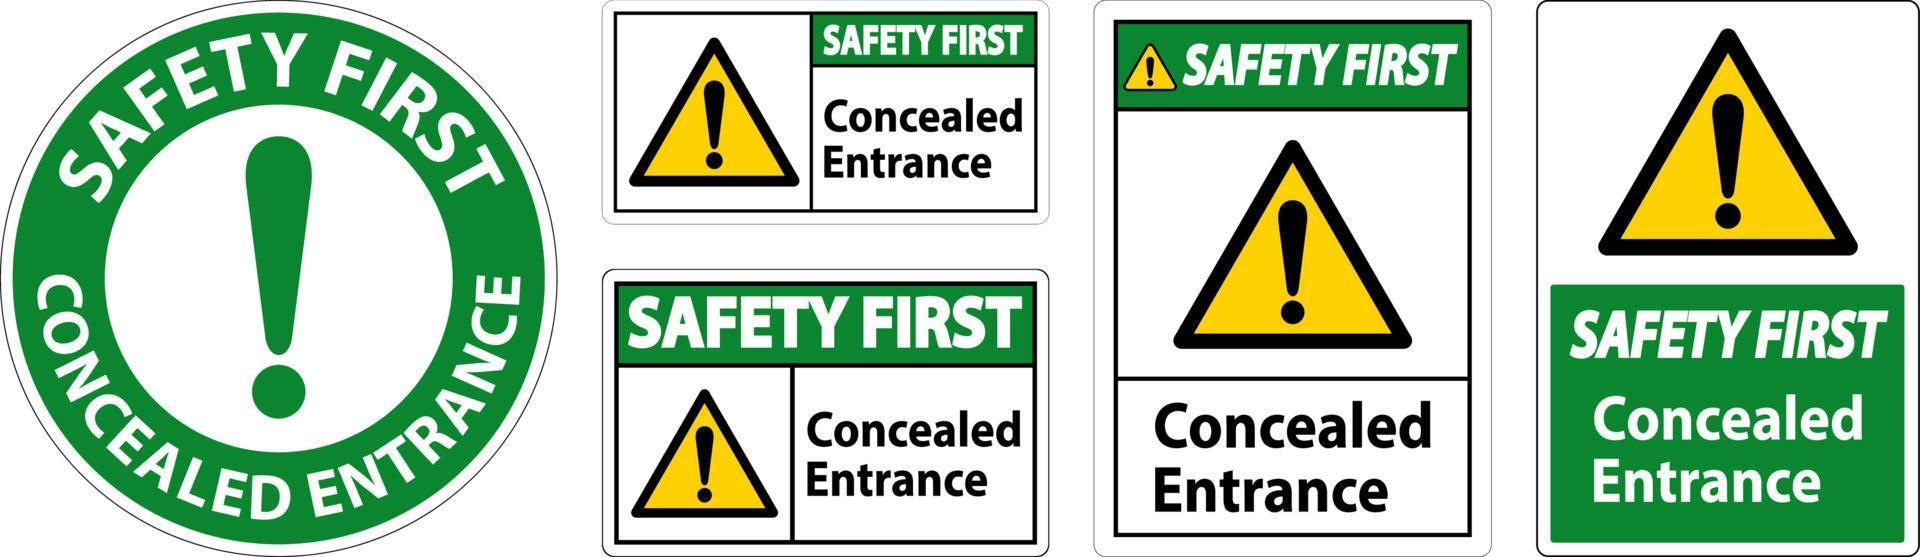 Safety First Label Concealed Entrance Sign On White Background vector